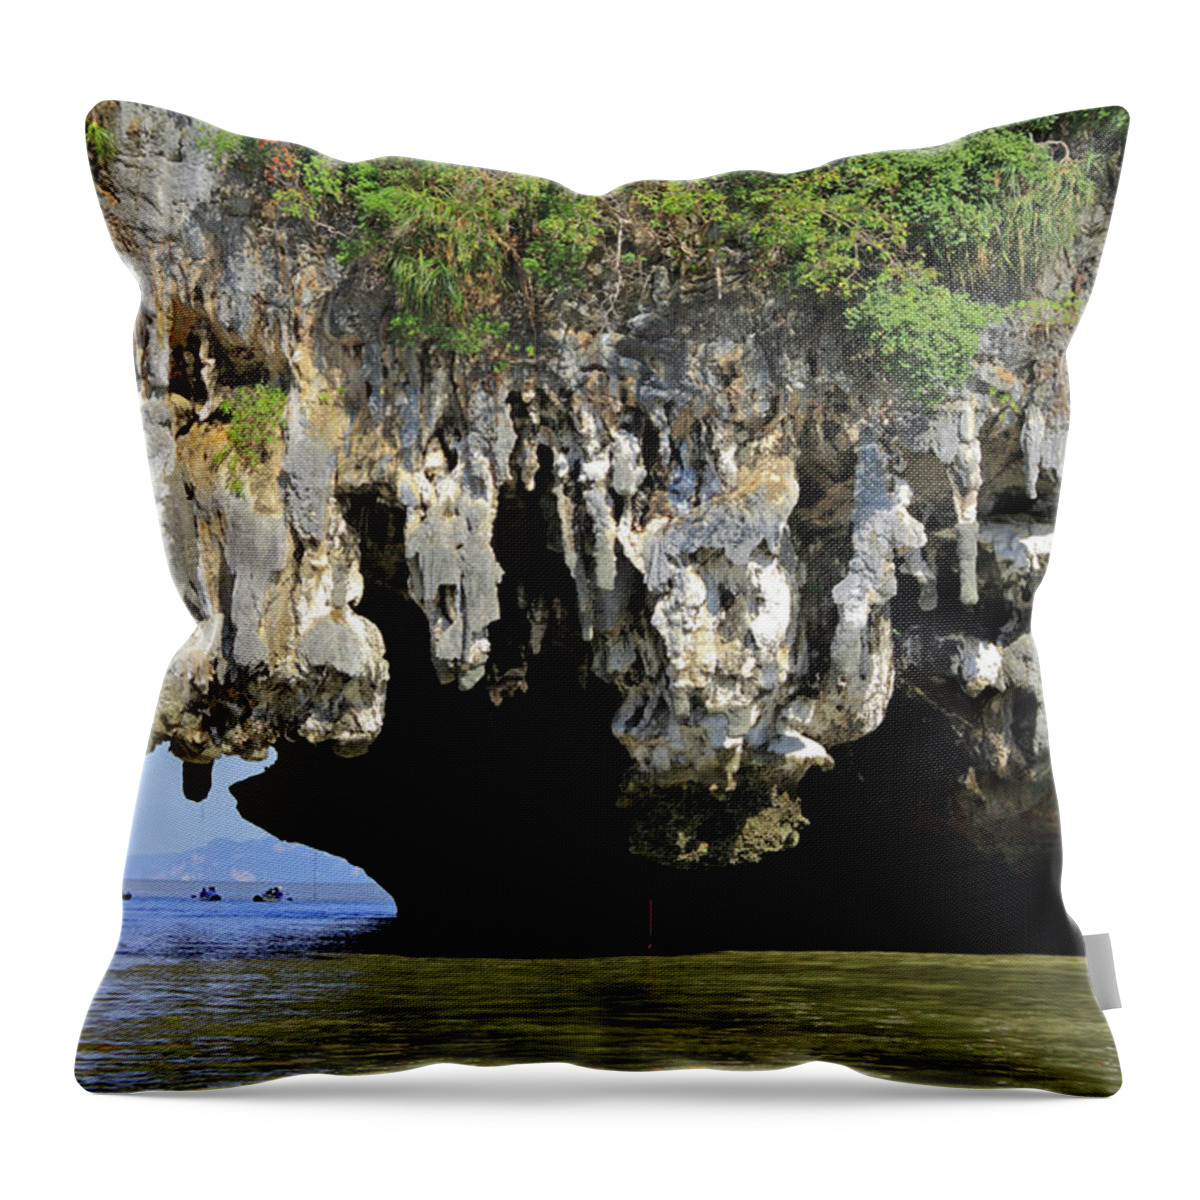 Scenics Throw Pillow featuring the photograph Phang Nga Bay by Orchidpoet